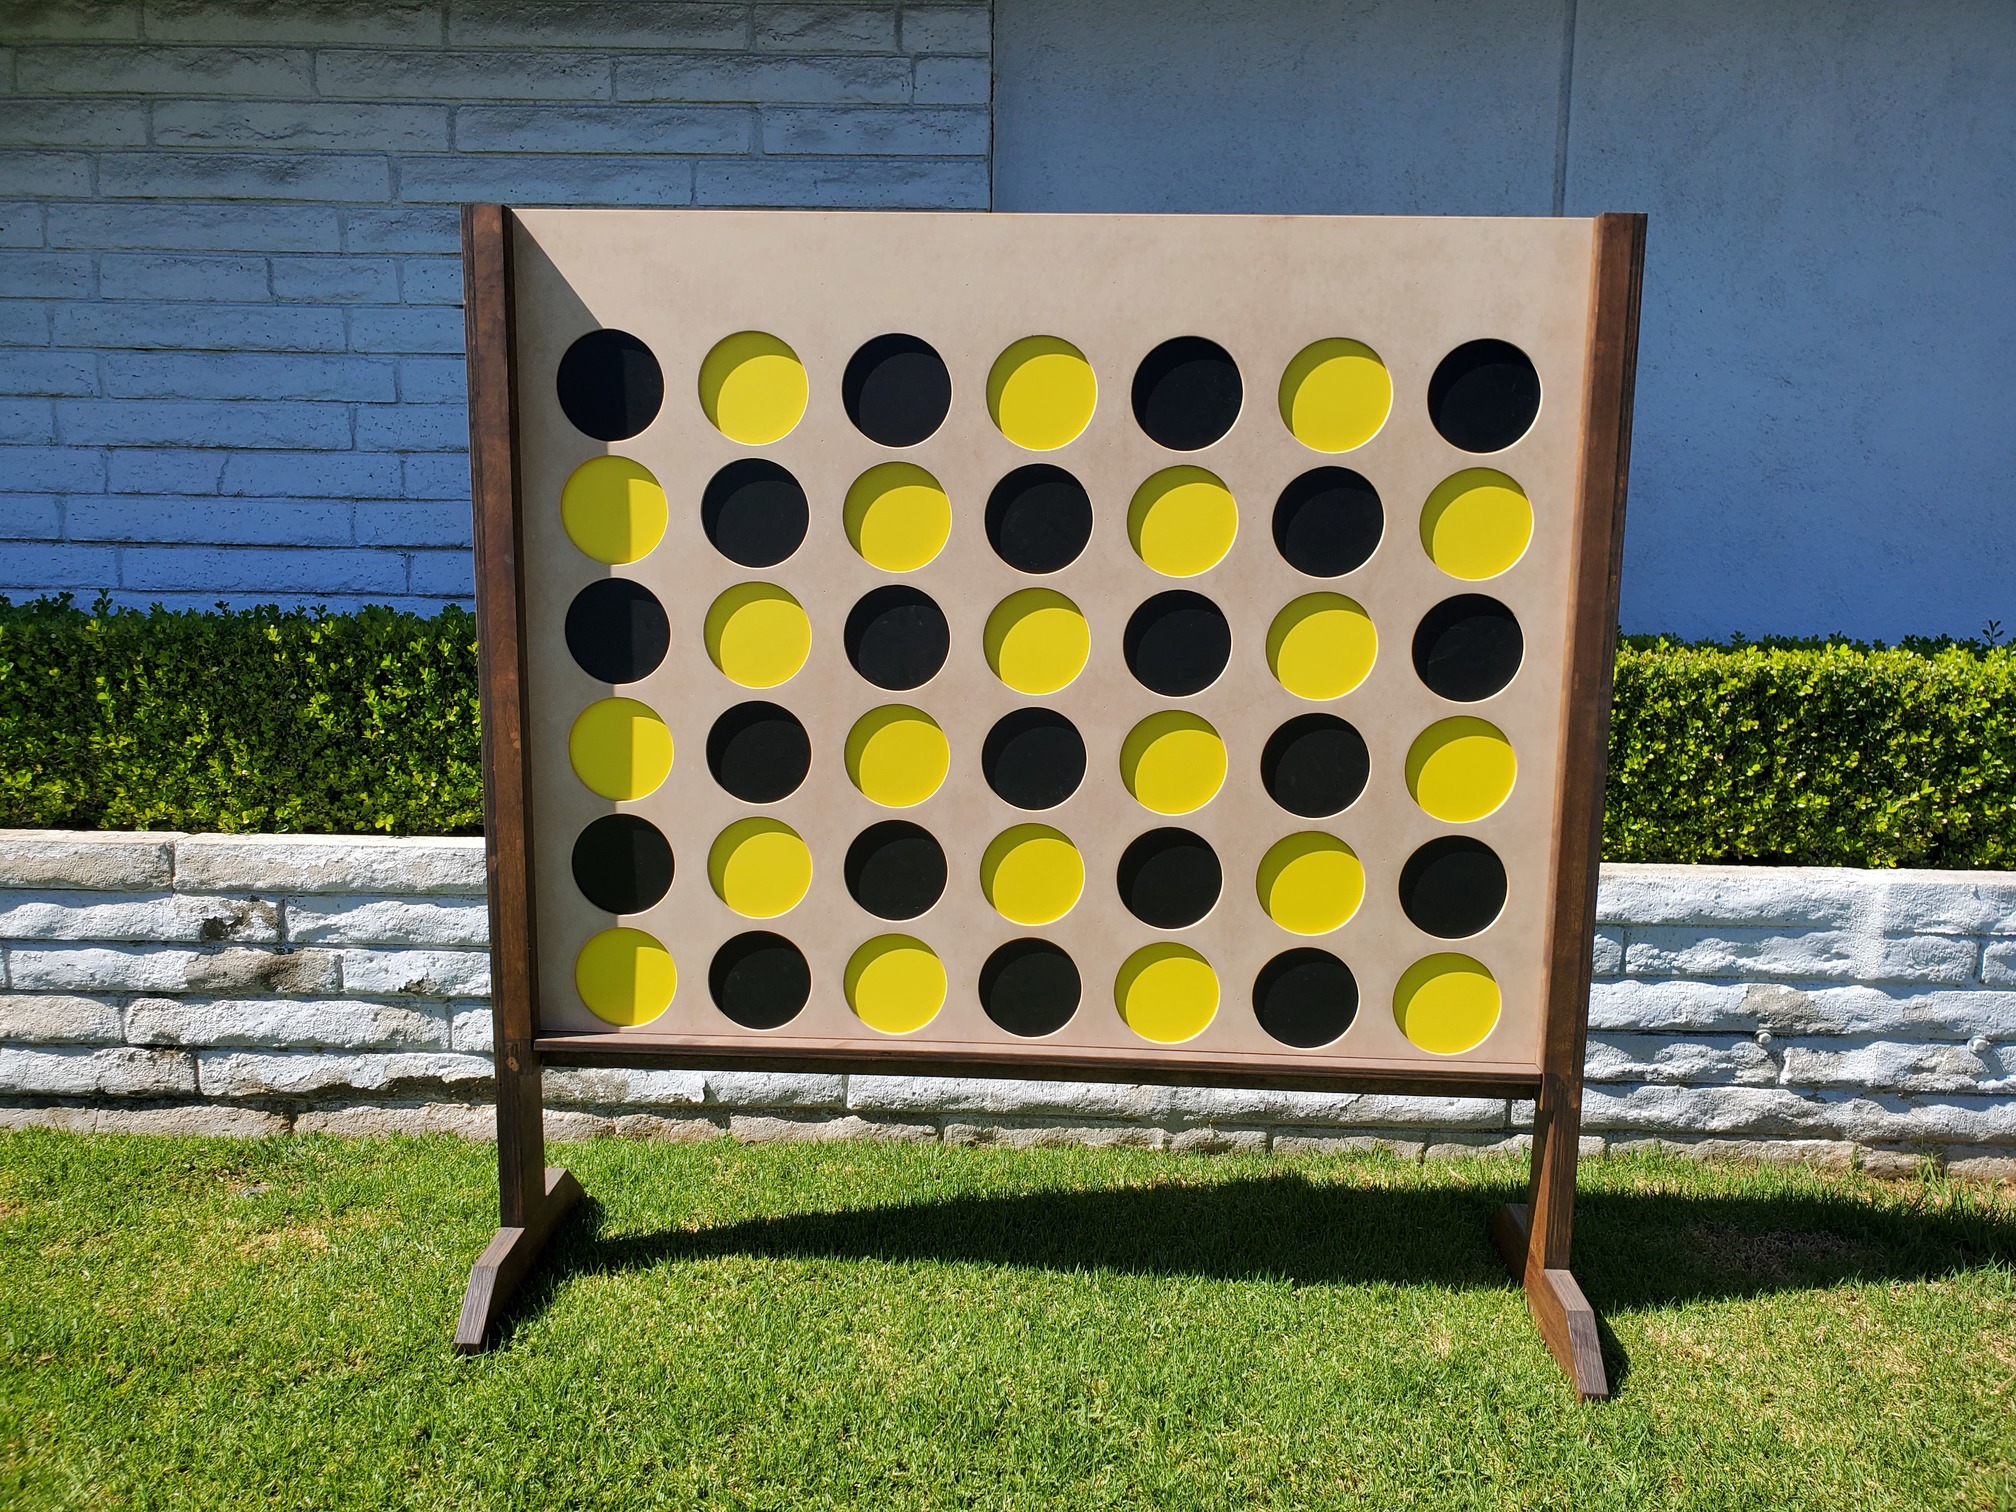 Giant Connect 4, backyard games